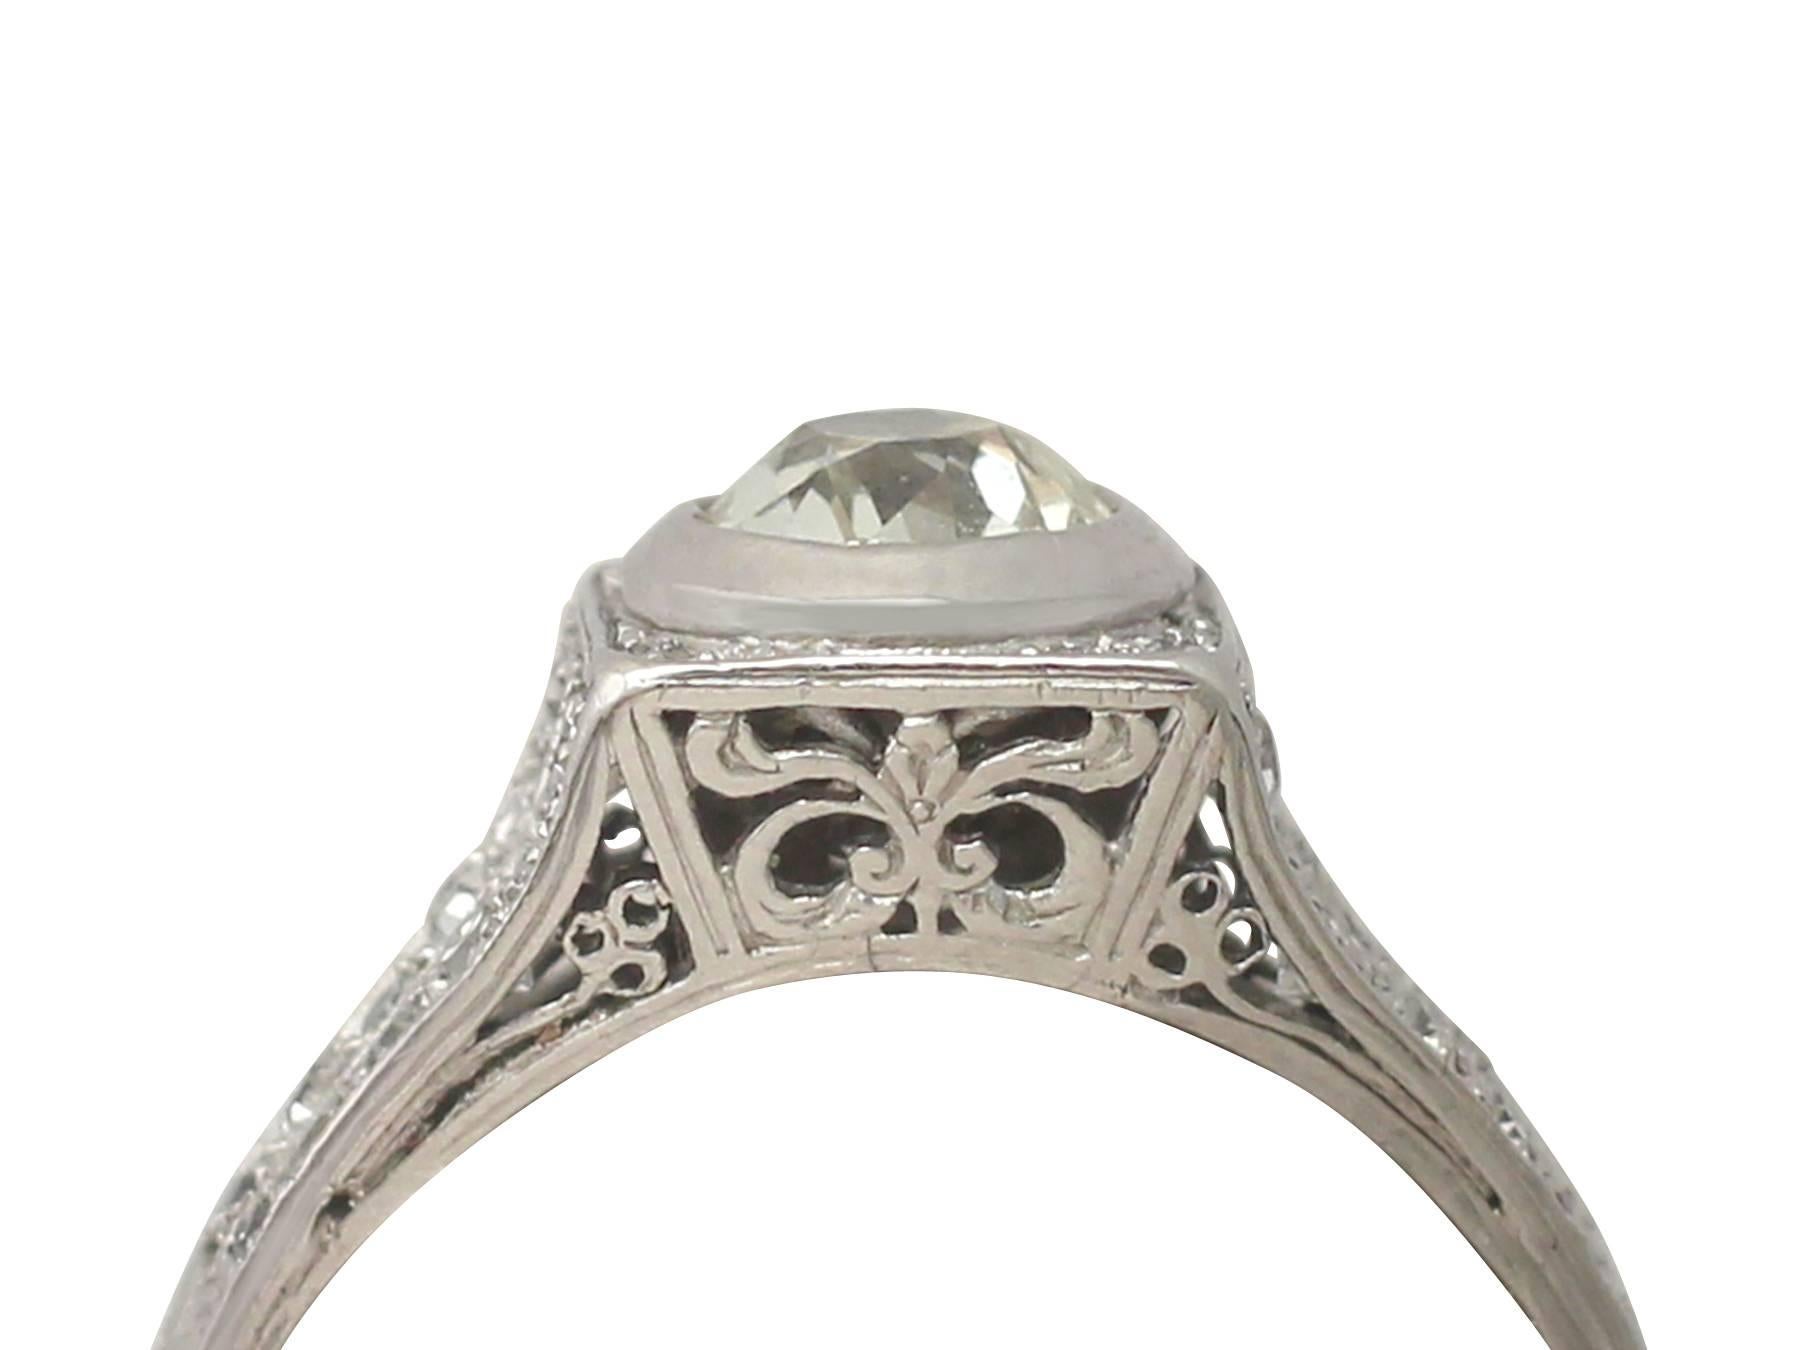 This stunning, fine and impressive diamonds has been crafted in platinum.

The ring has a pierced decorated, square shaped setting embellished with millegrain and bead decoration.

The ring displays a feature 0.85 ct Old European round cut diamond